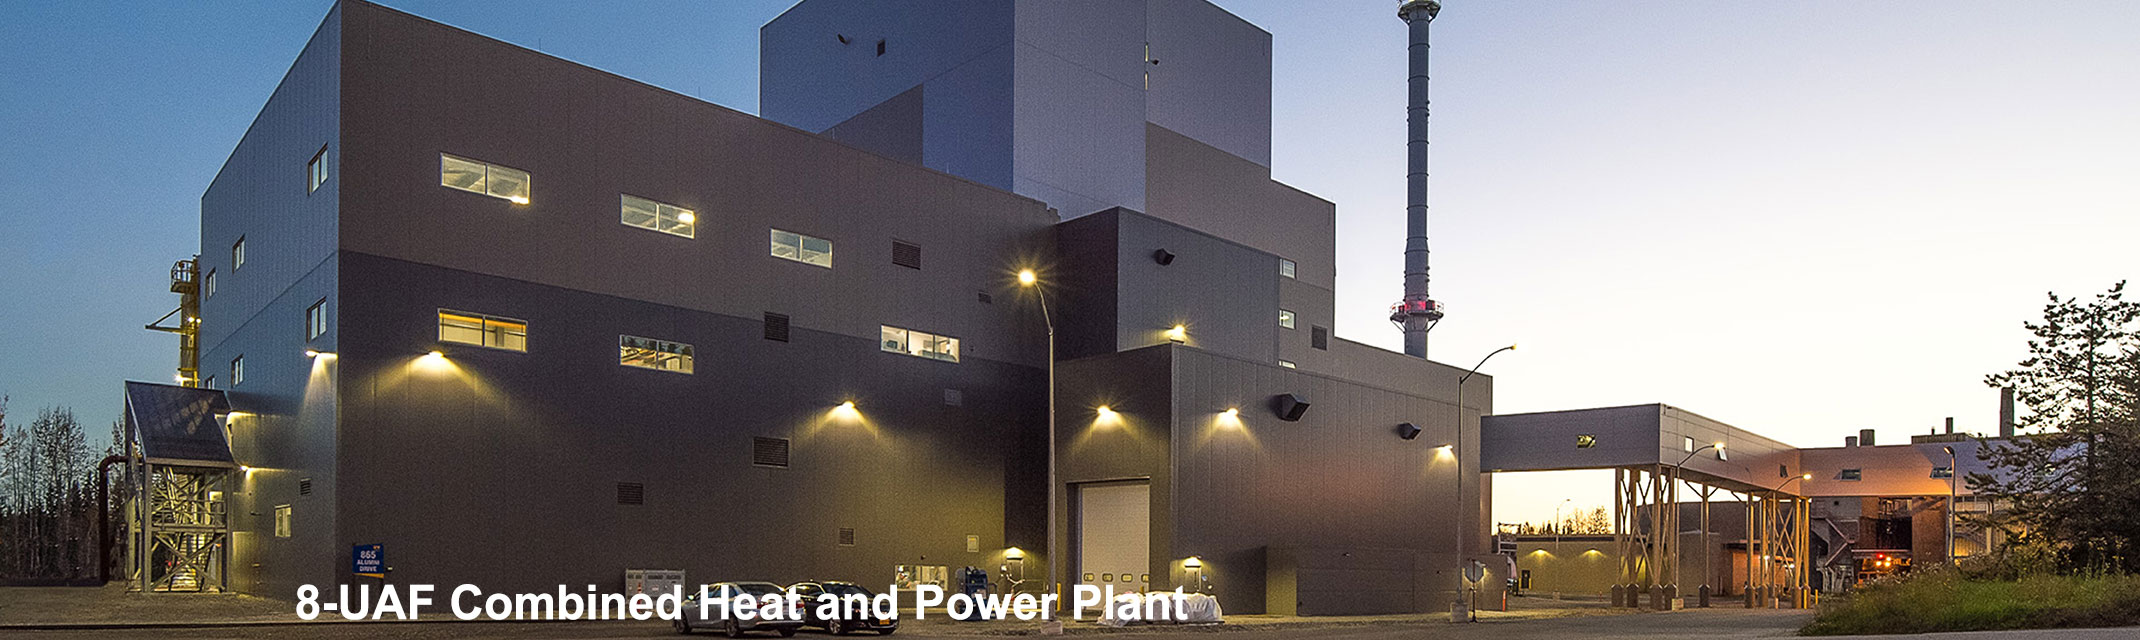 UAF Combined Heat and Power Plant